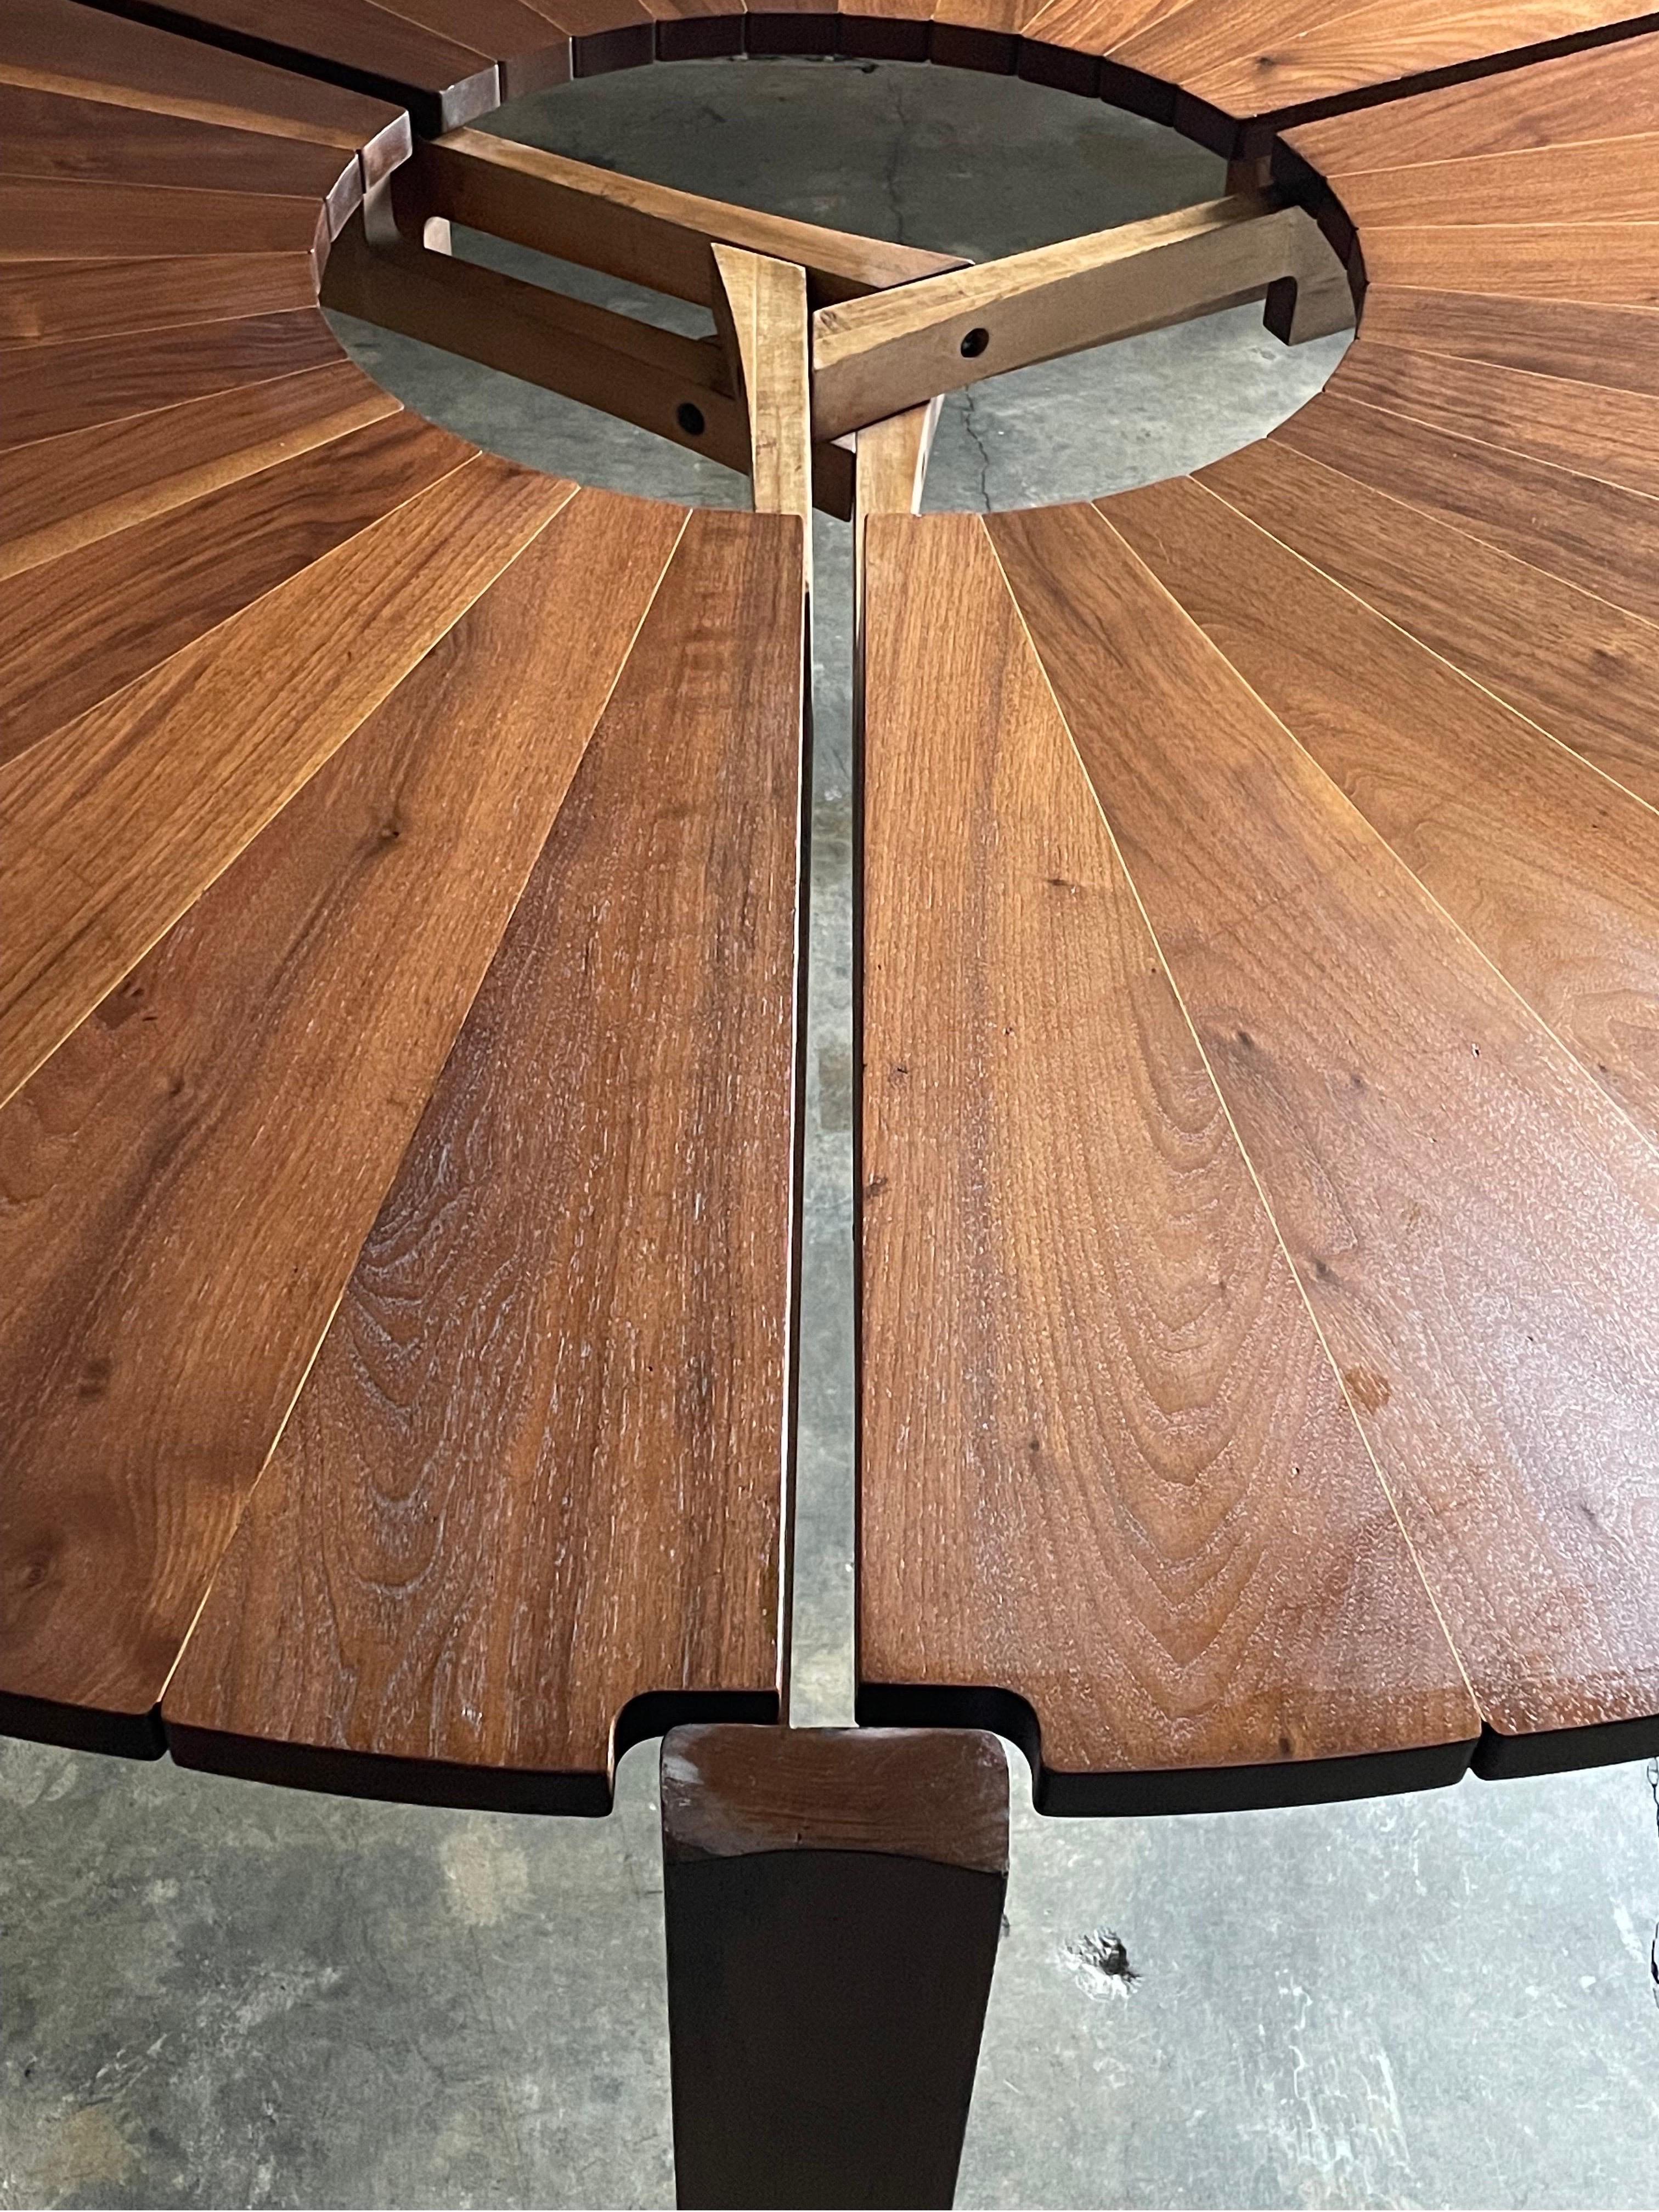 Late 20th Century Studiocraft Round Petal Dining Table in Walnut and Maple, Charles Faucher 1975